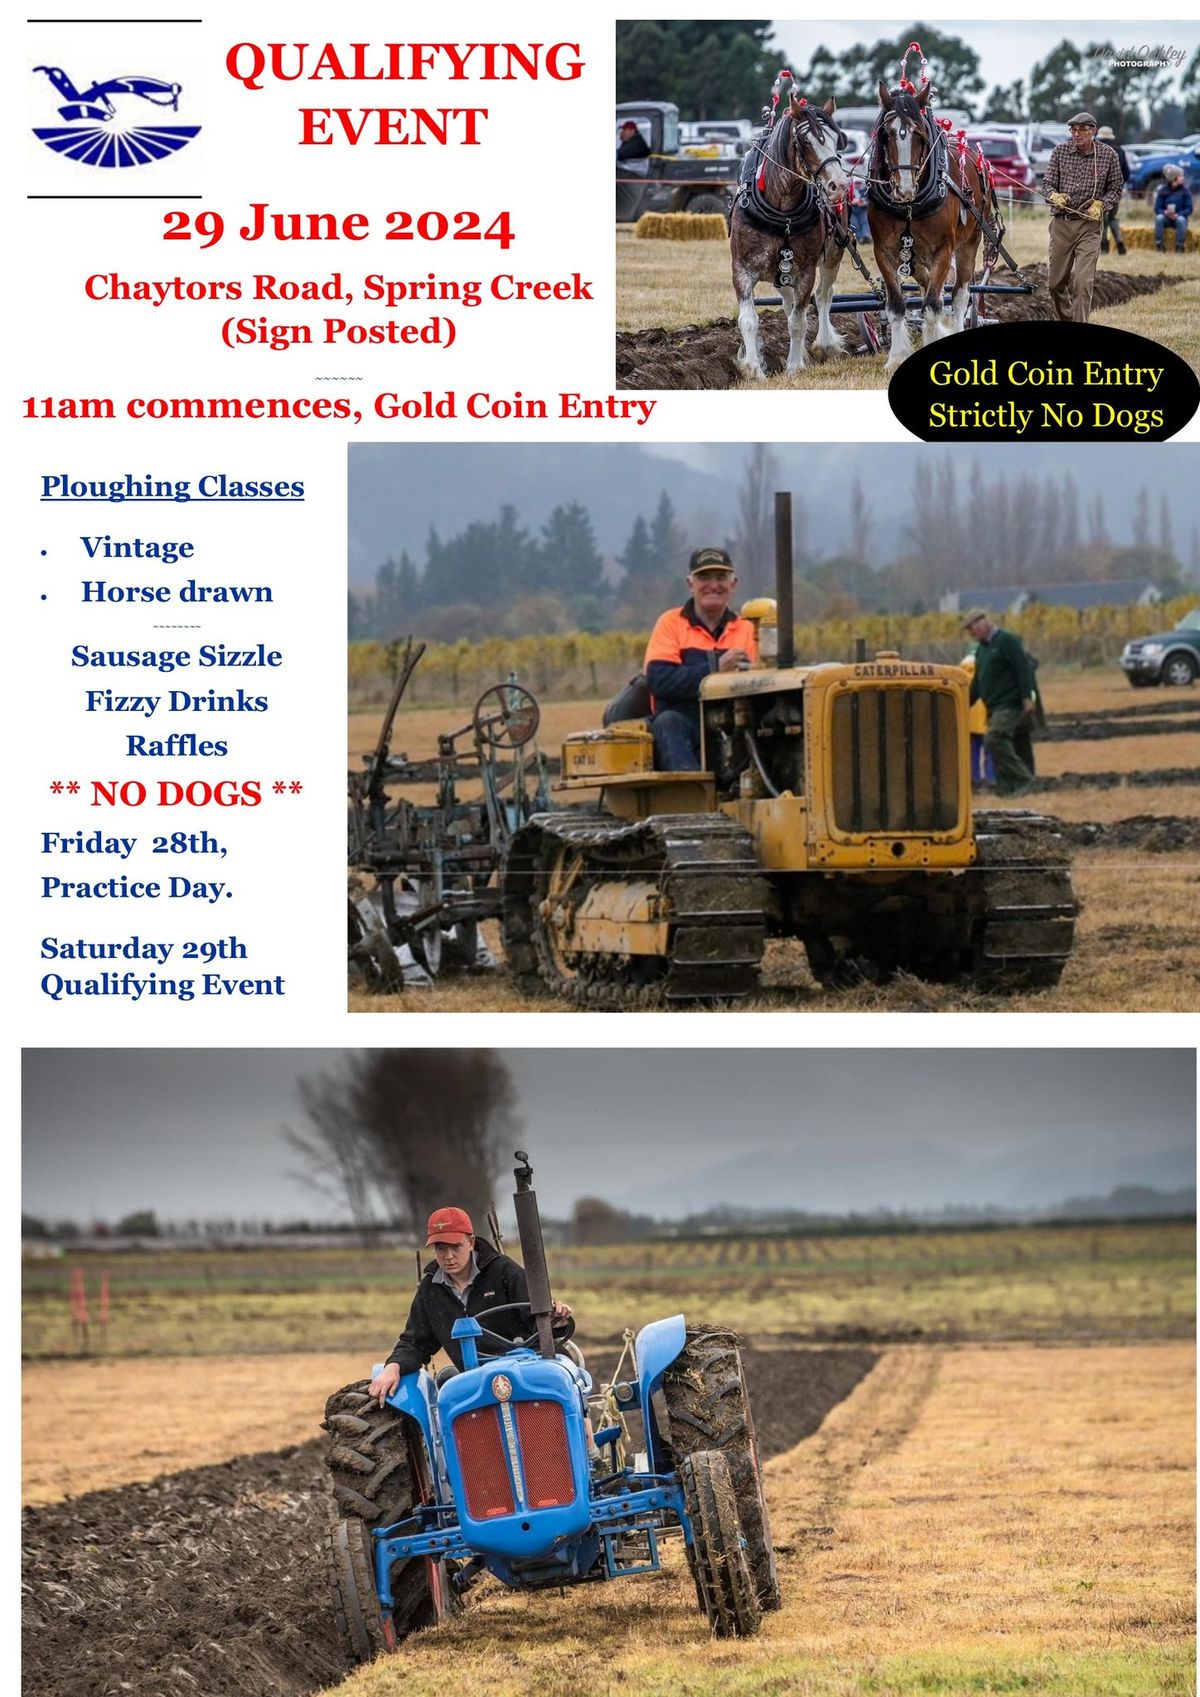 The Marlborough Ploughing Assn. 2024 Qualifying Event